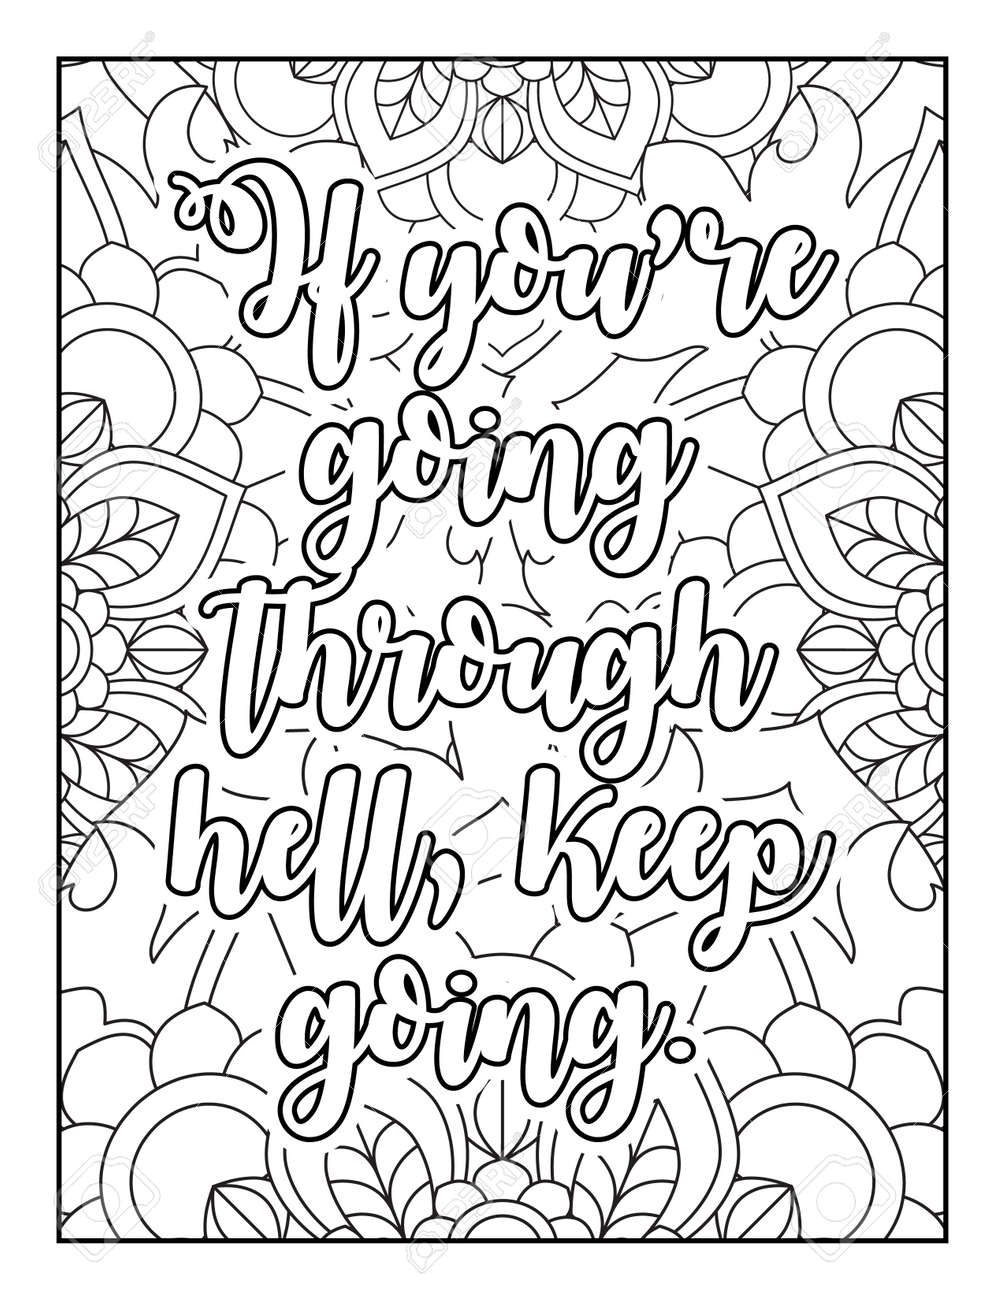 Motivational quotes coloring page inspirational quotes coloring page affirmative quotes coloring page positive quotes coloring page good vibes swear word coloring page motivational typography royalty free svg cliparts vectors and stock